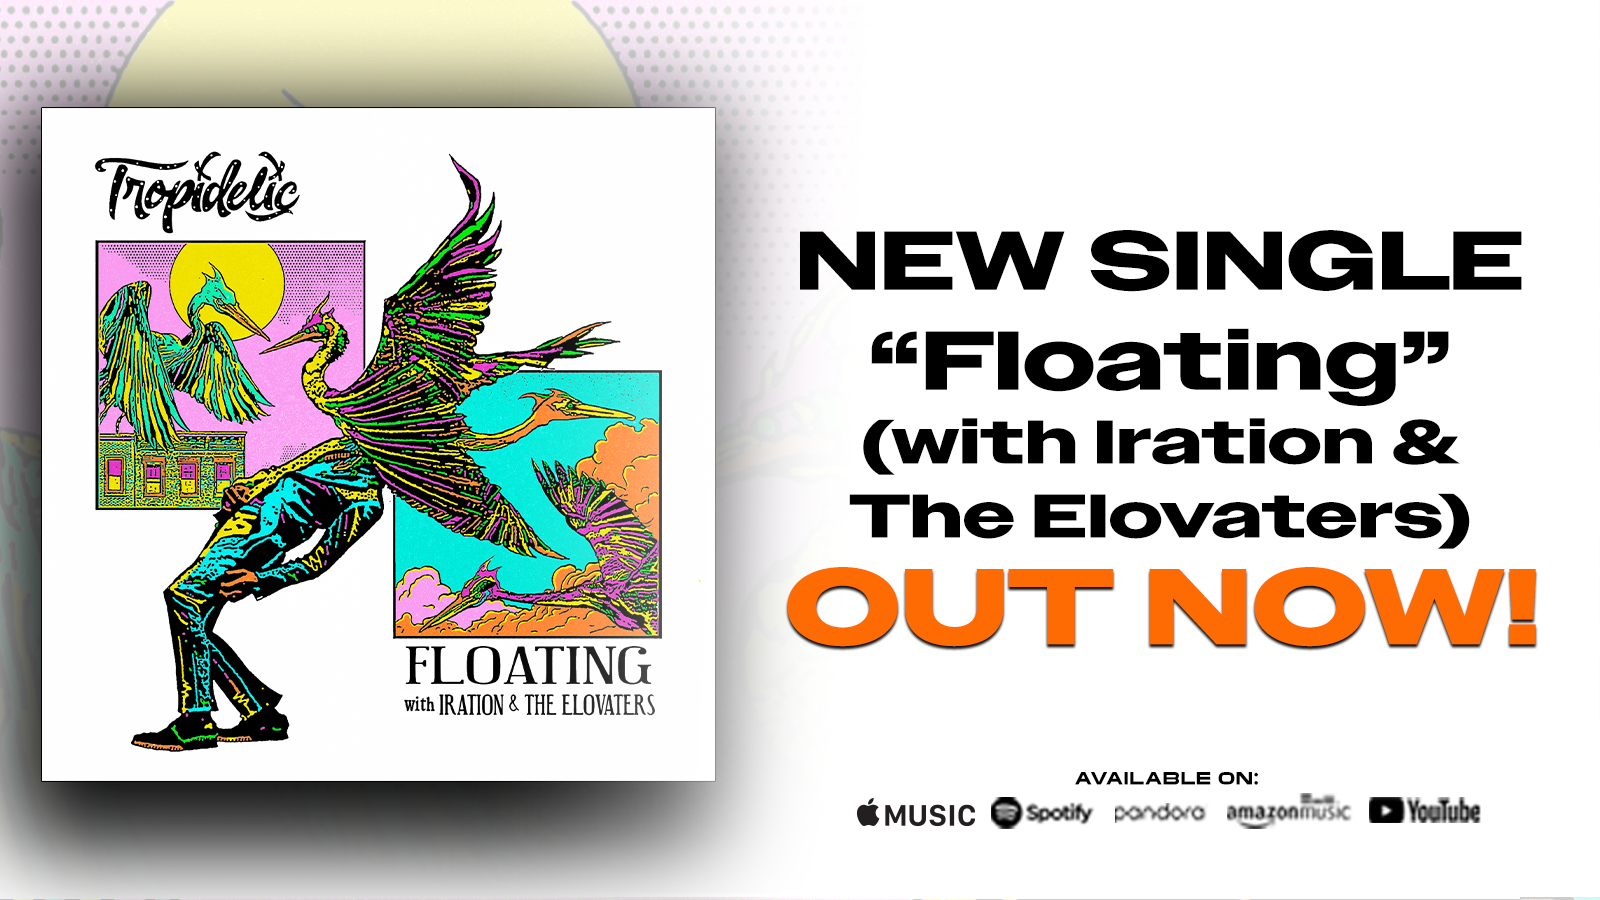 “Floating” ft. Iration & The Elovaters